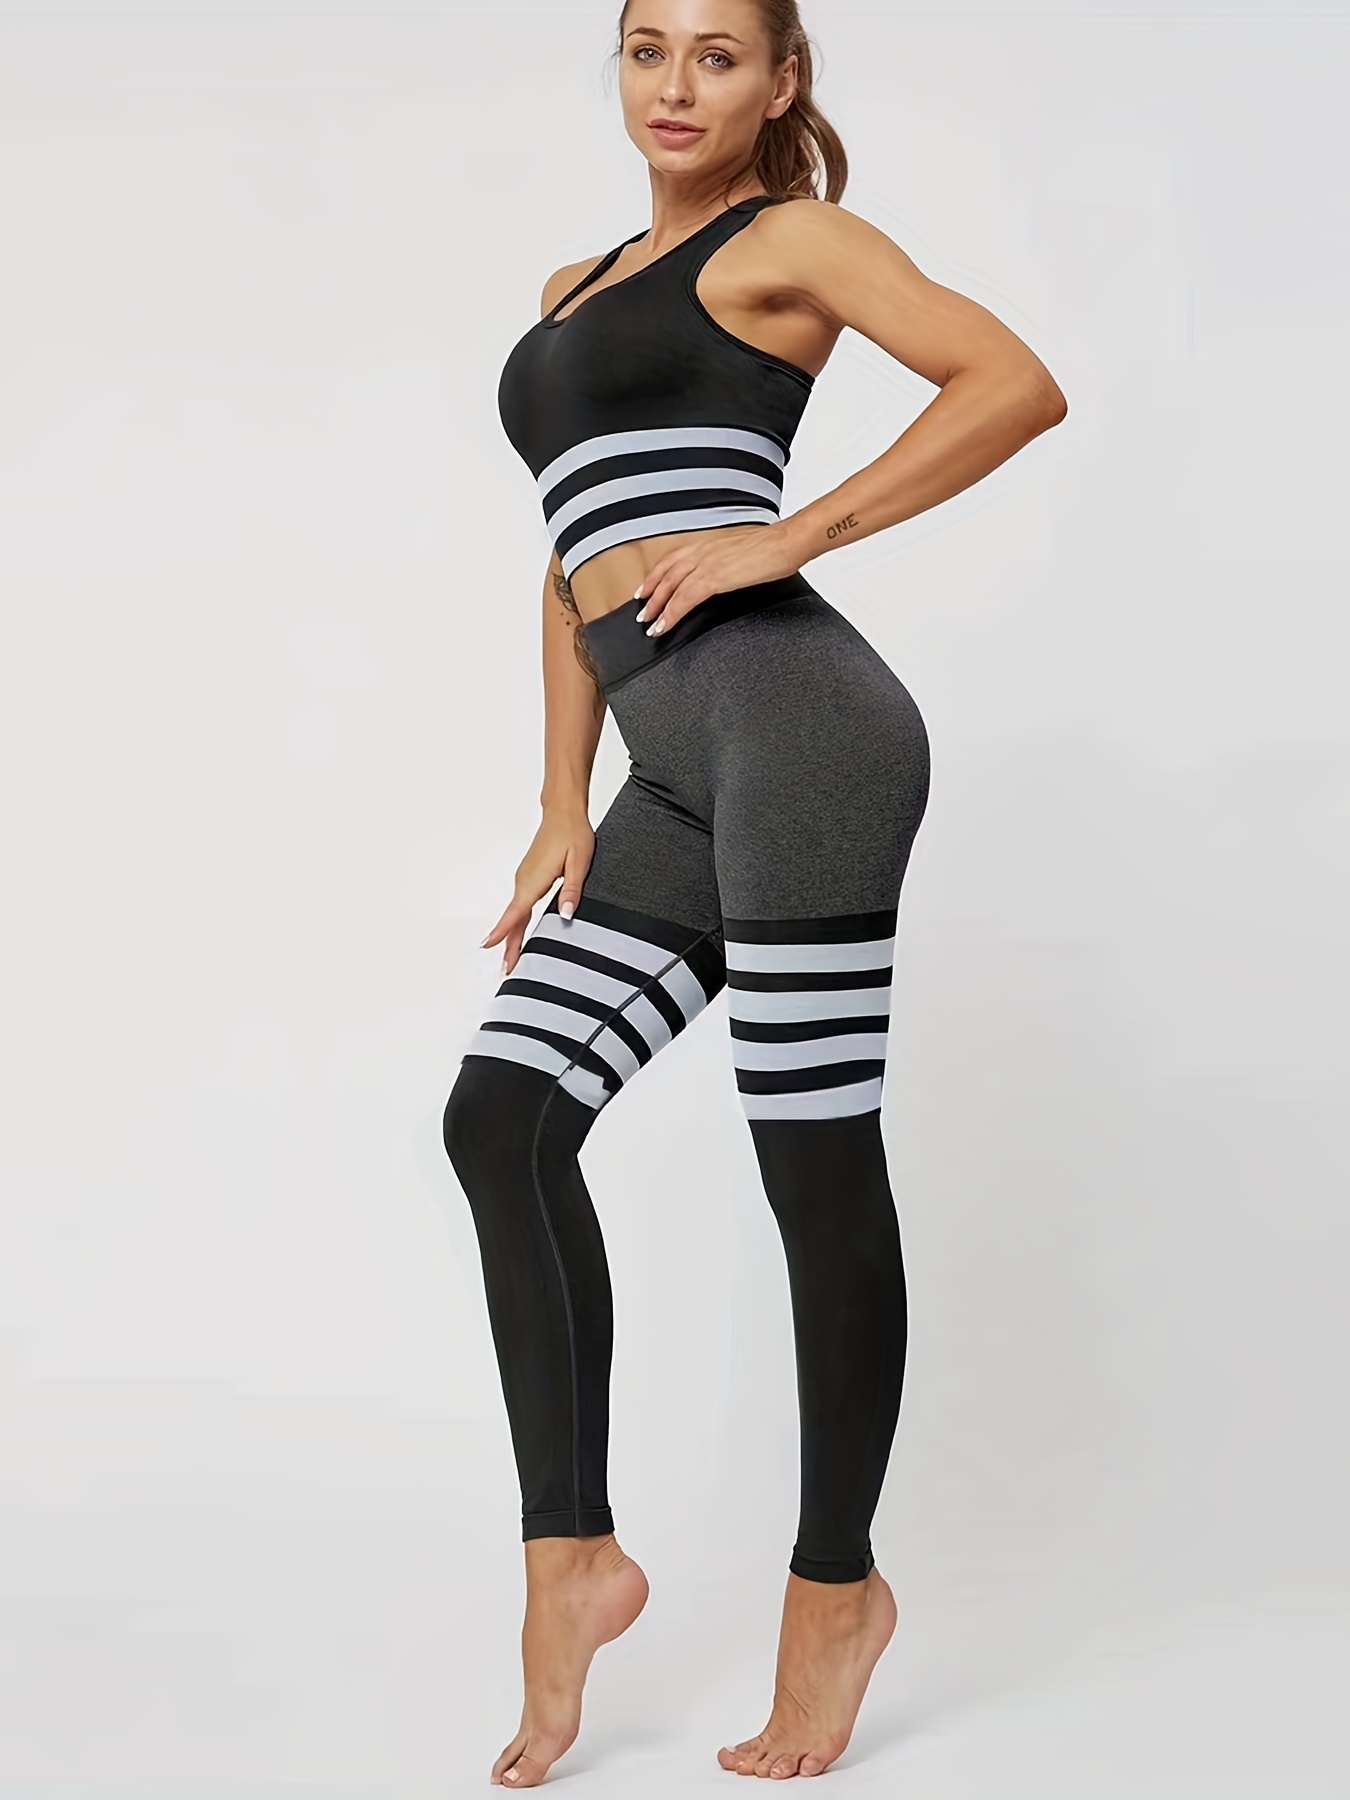 Team Stripes Blue & White Striped Leggings – The Uncommonwealth of